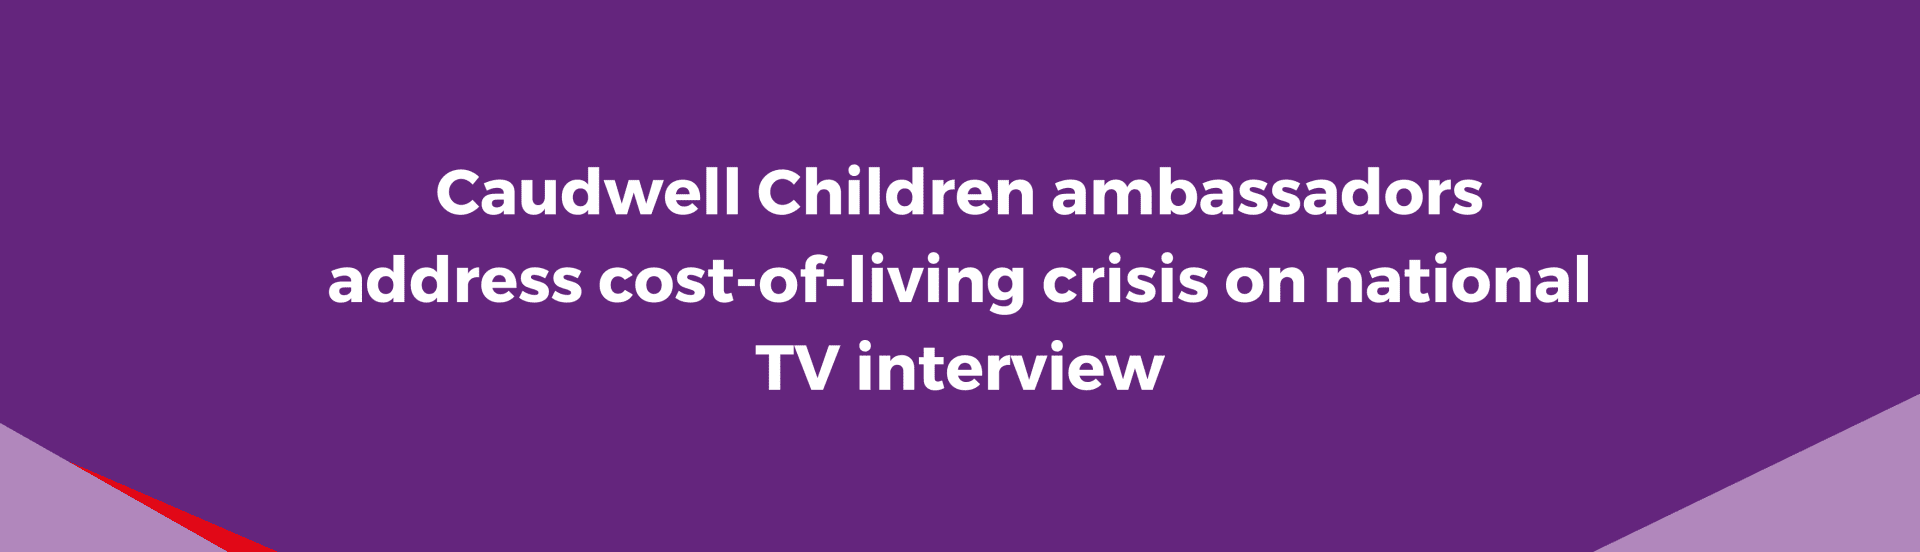 Caudwell Children Ambassadors address the cost-of-living crisis in National TV interview